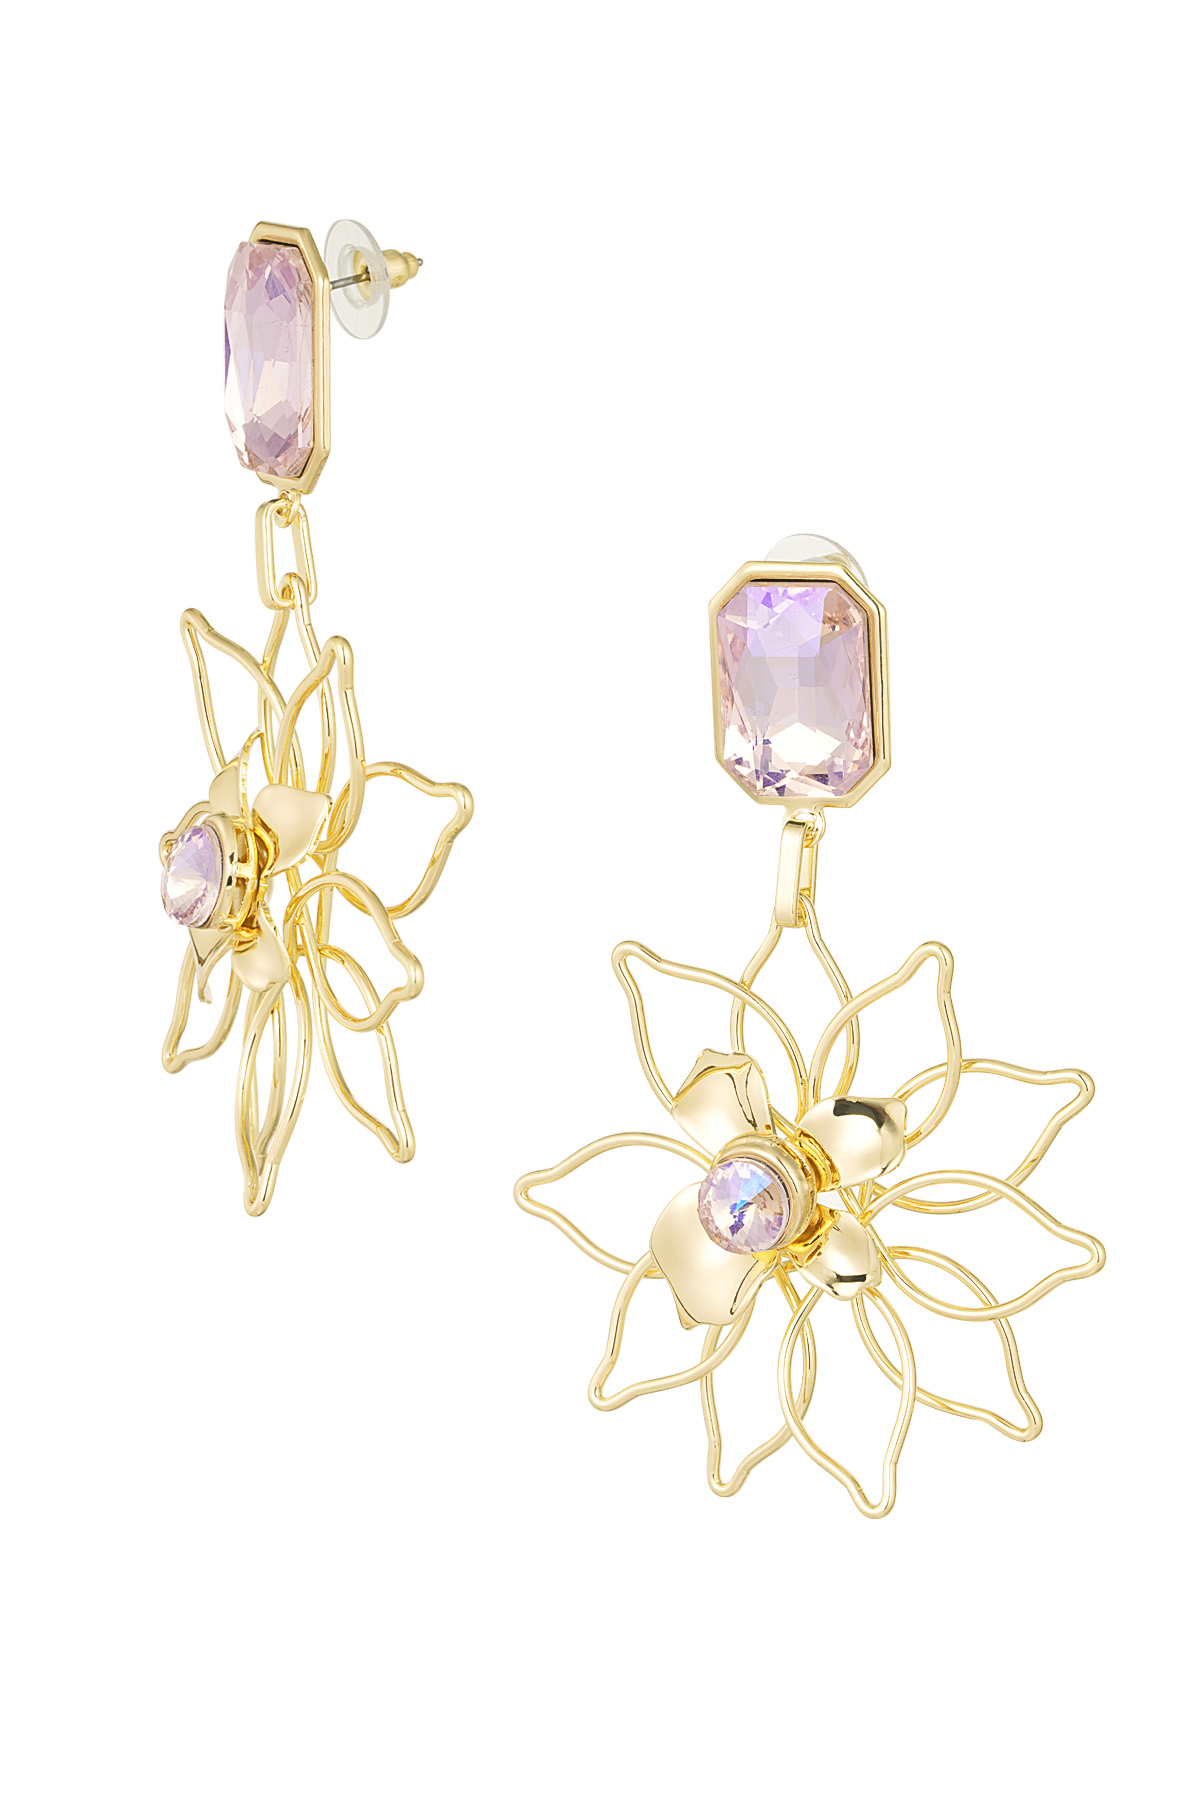 Sparkly earrings with flower pendant - pink